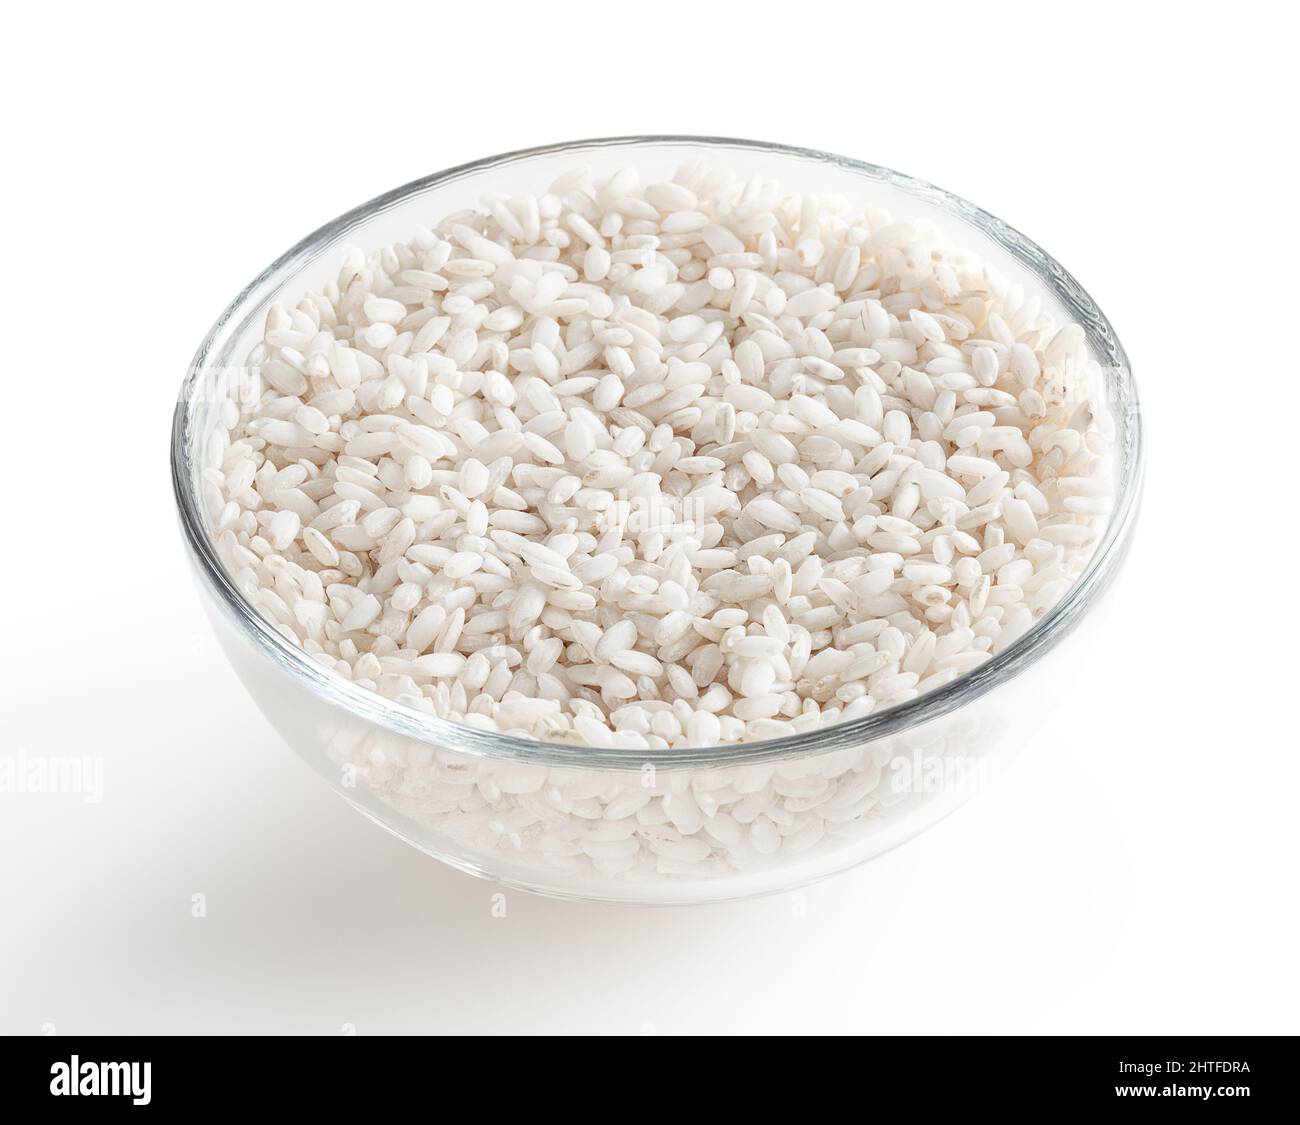 Uncooked arborio rice in glass bowl isolated on white background with clipping path Stock Photo